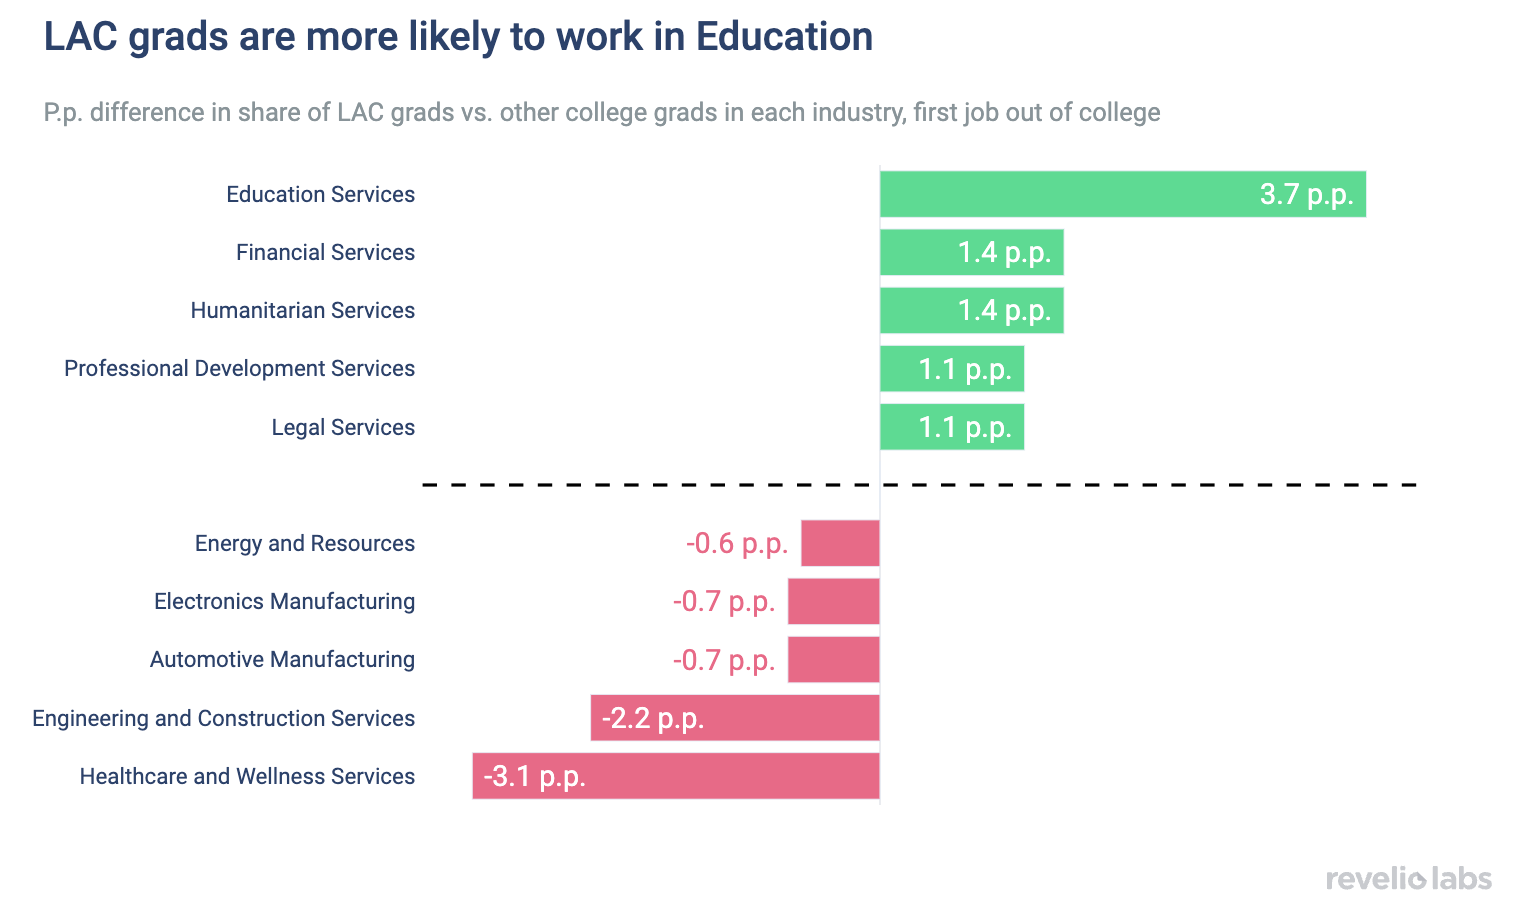 LAC grads are more likely to work in Education